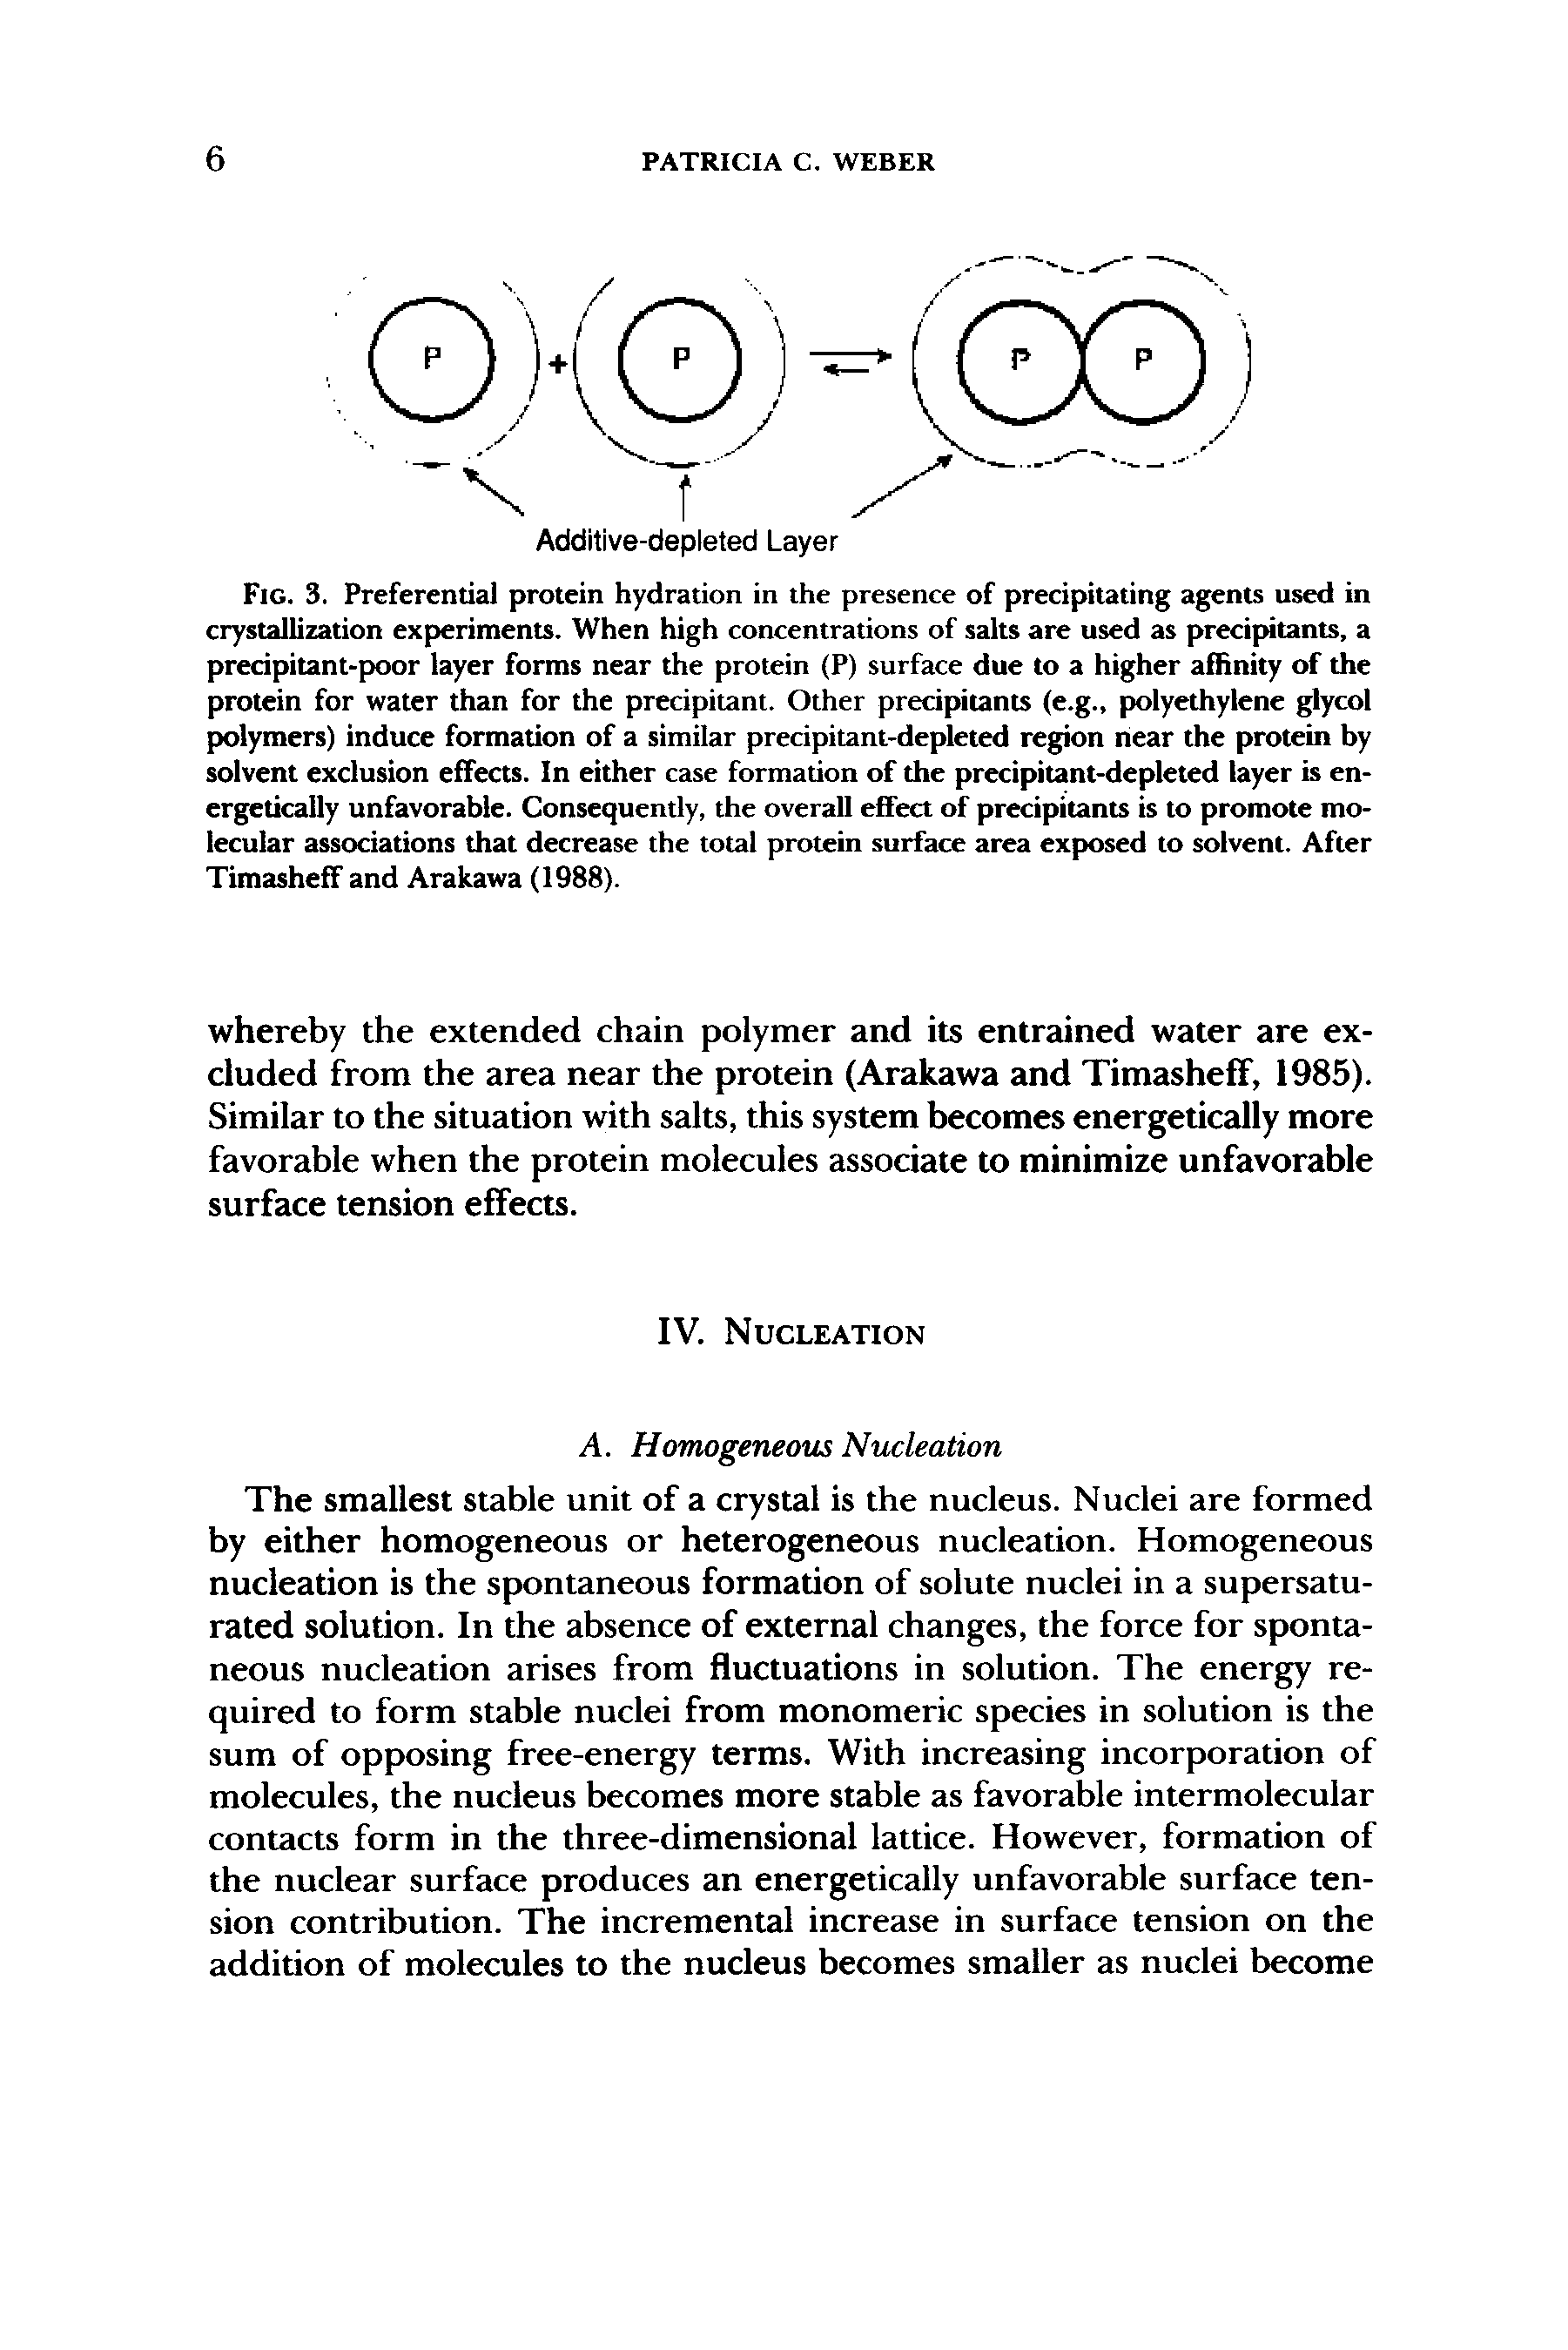 Fig. 3. Preferential protein hydration in the presence of precipitating agents used in crystallization experiments. When high concentrations of salts are used as precipitants, a precipitant-poor layer forms near the protein (P) surface due to a higher affinity of the protein for water than for the precipitant. Other precipitants (e.g., polyethylene glycol polymers) induce formation of a similar precipitant-depleted region near the protein by solvent exclusion effects. In either case formation of the precipitant-depleted layer is energetically unfavorable. Consequently, the overall effect of precipitants is to promote molecular associations that decrease the total protein surface area exposed to solvent. After Timasheff and Arakawa (1988).